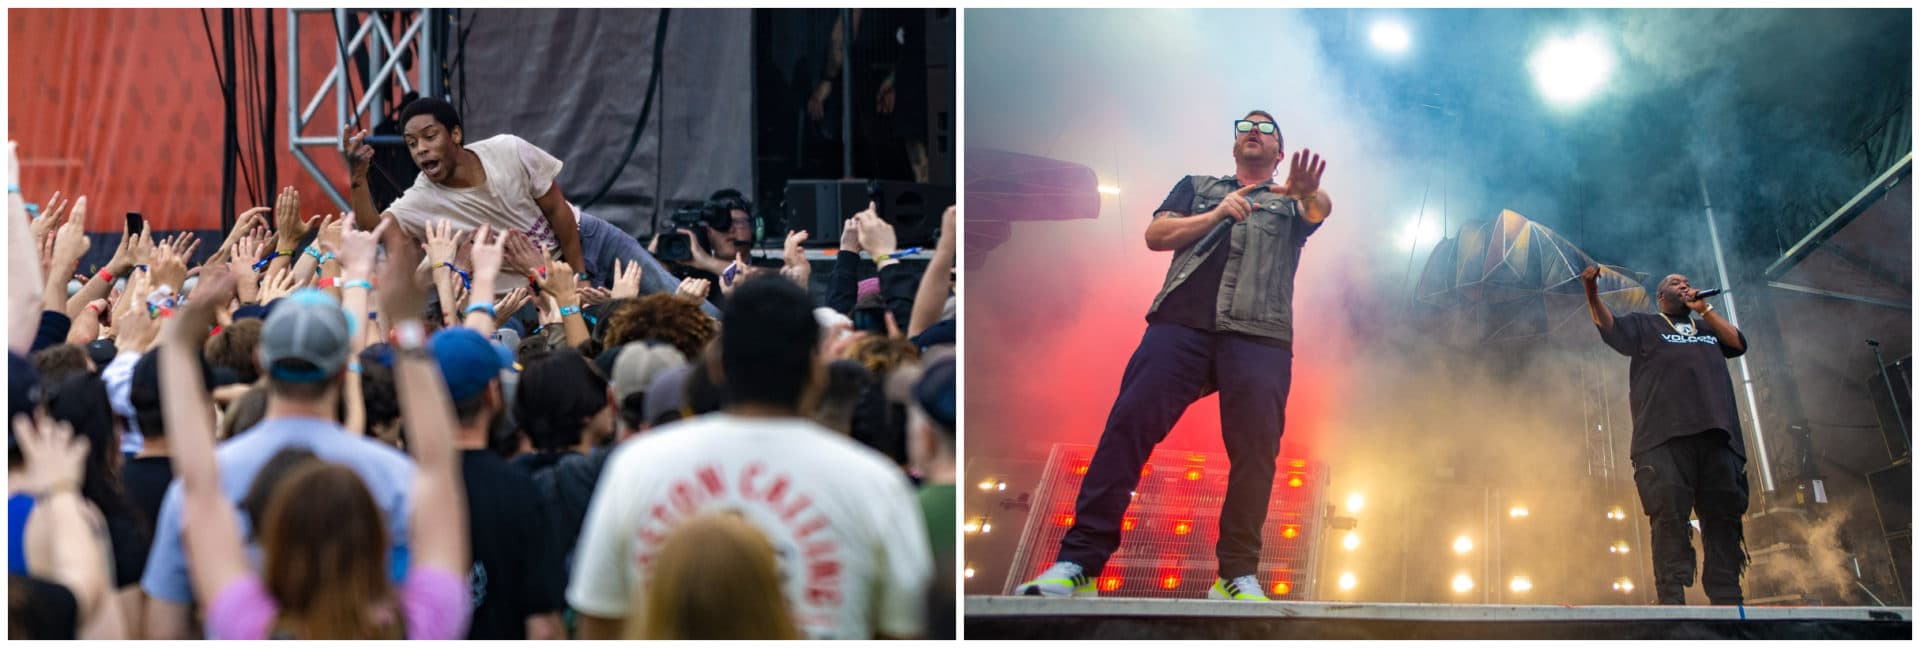 Left: KennyHoopla dives into the crowd during his set at the Boston Calling Music Festival. Right: El-P and Killer Mike of Run the Jewels performing at the Boston Calling Music Festival. (Jesse Costa/WBUR)